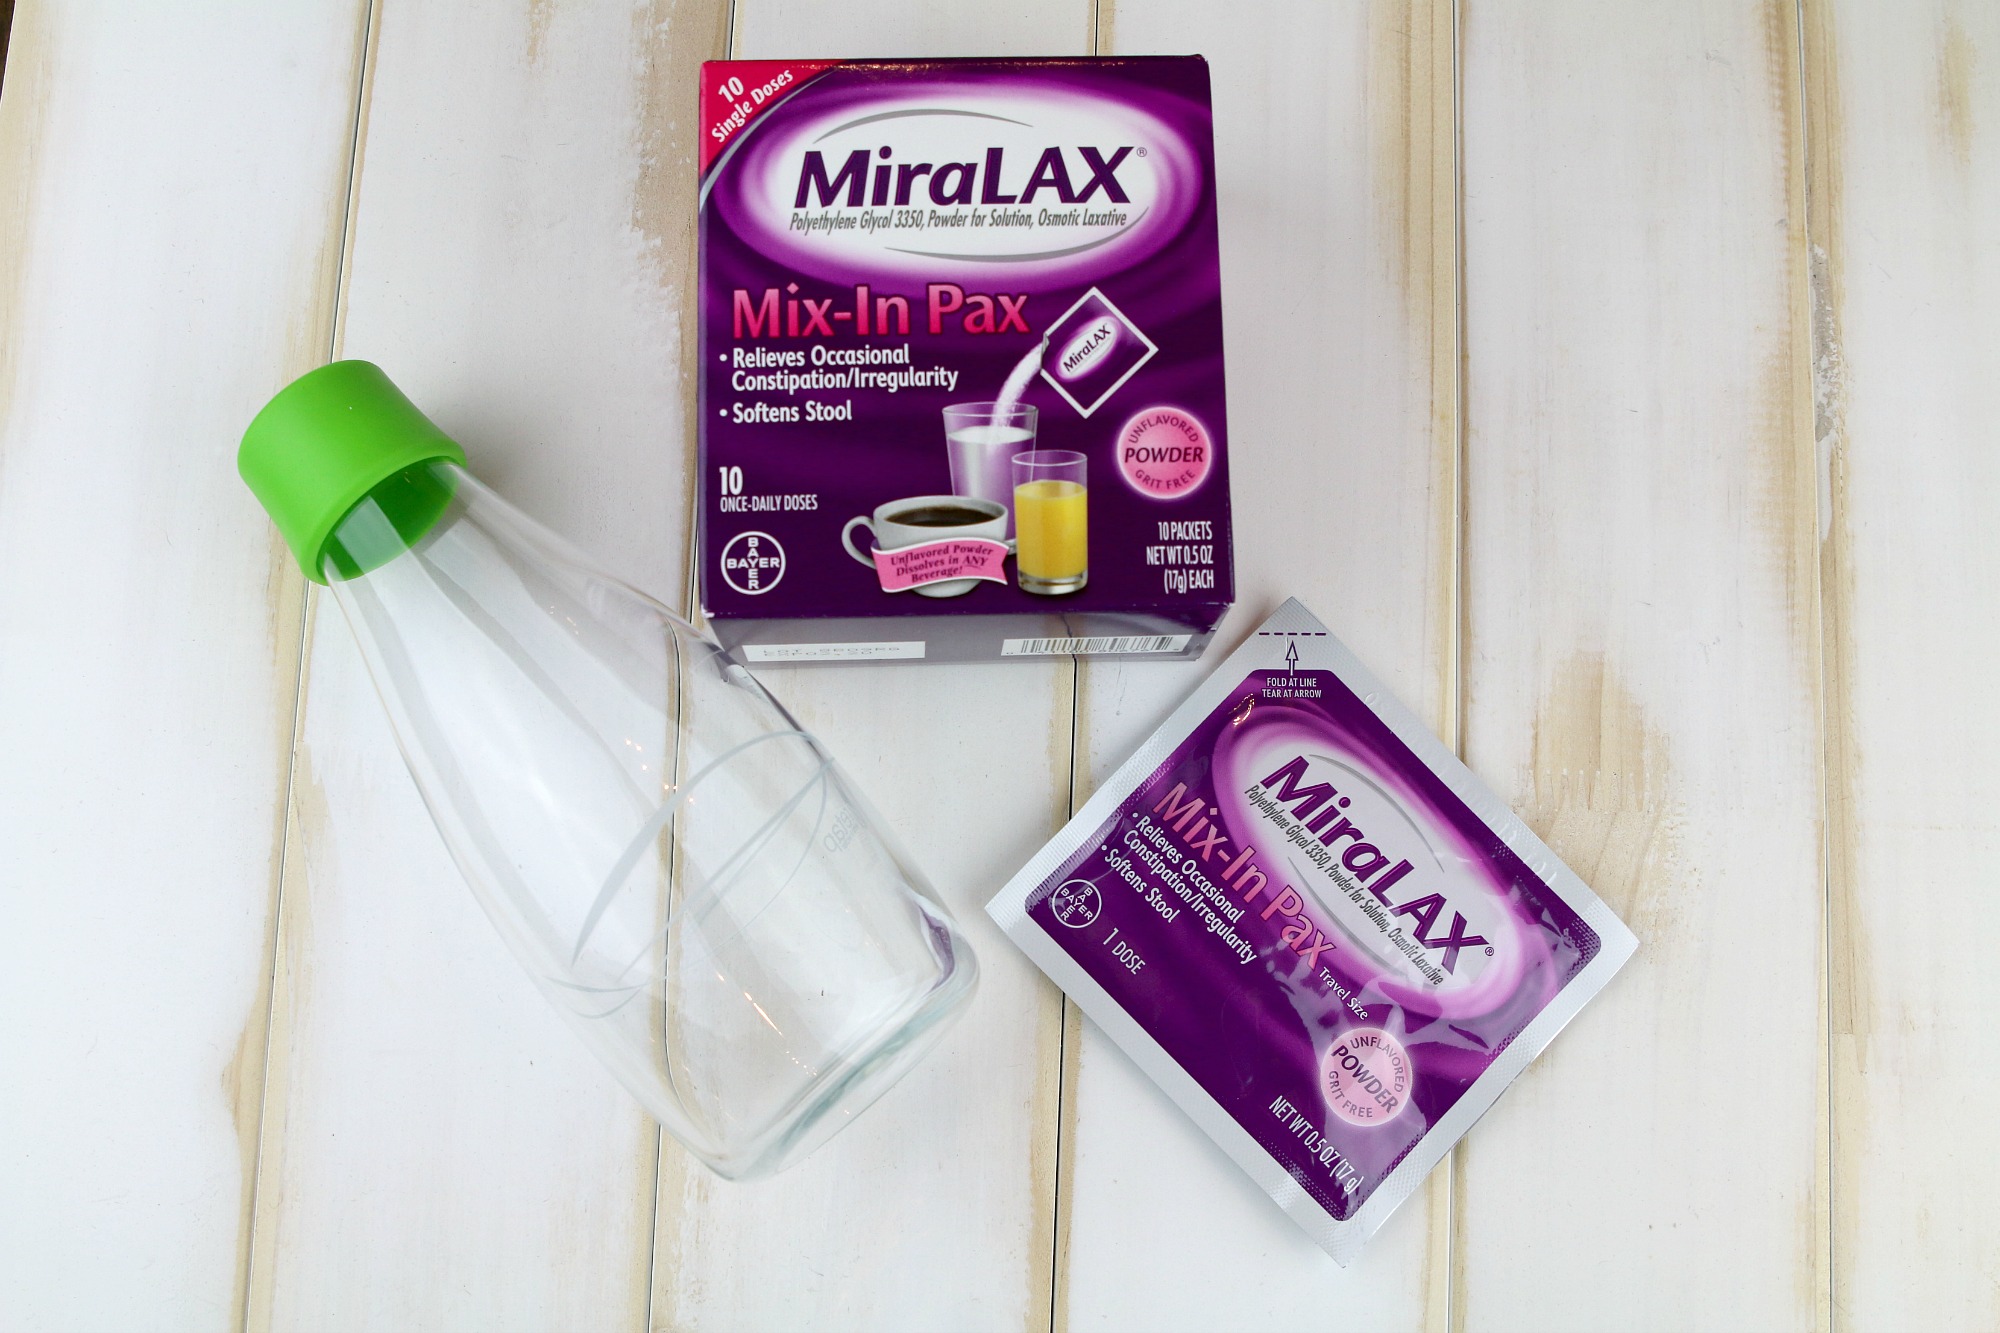 MiraLAX Mix-In Pax for travel